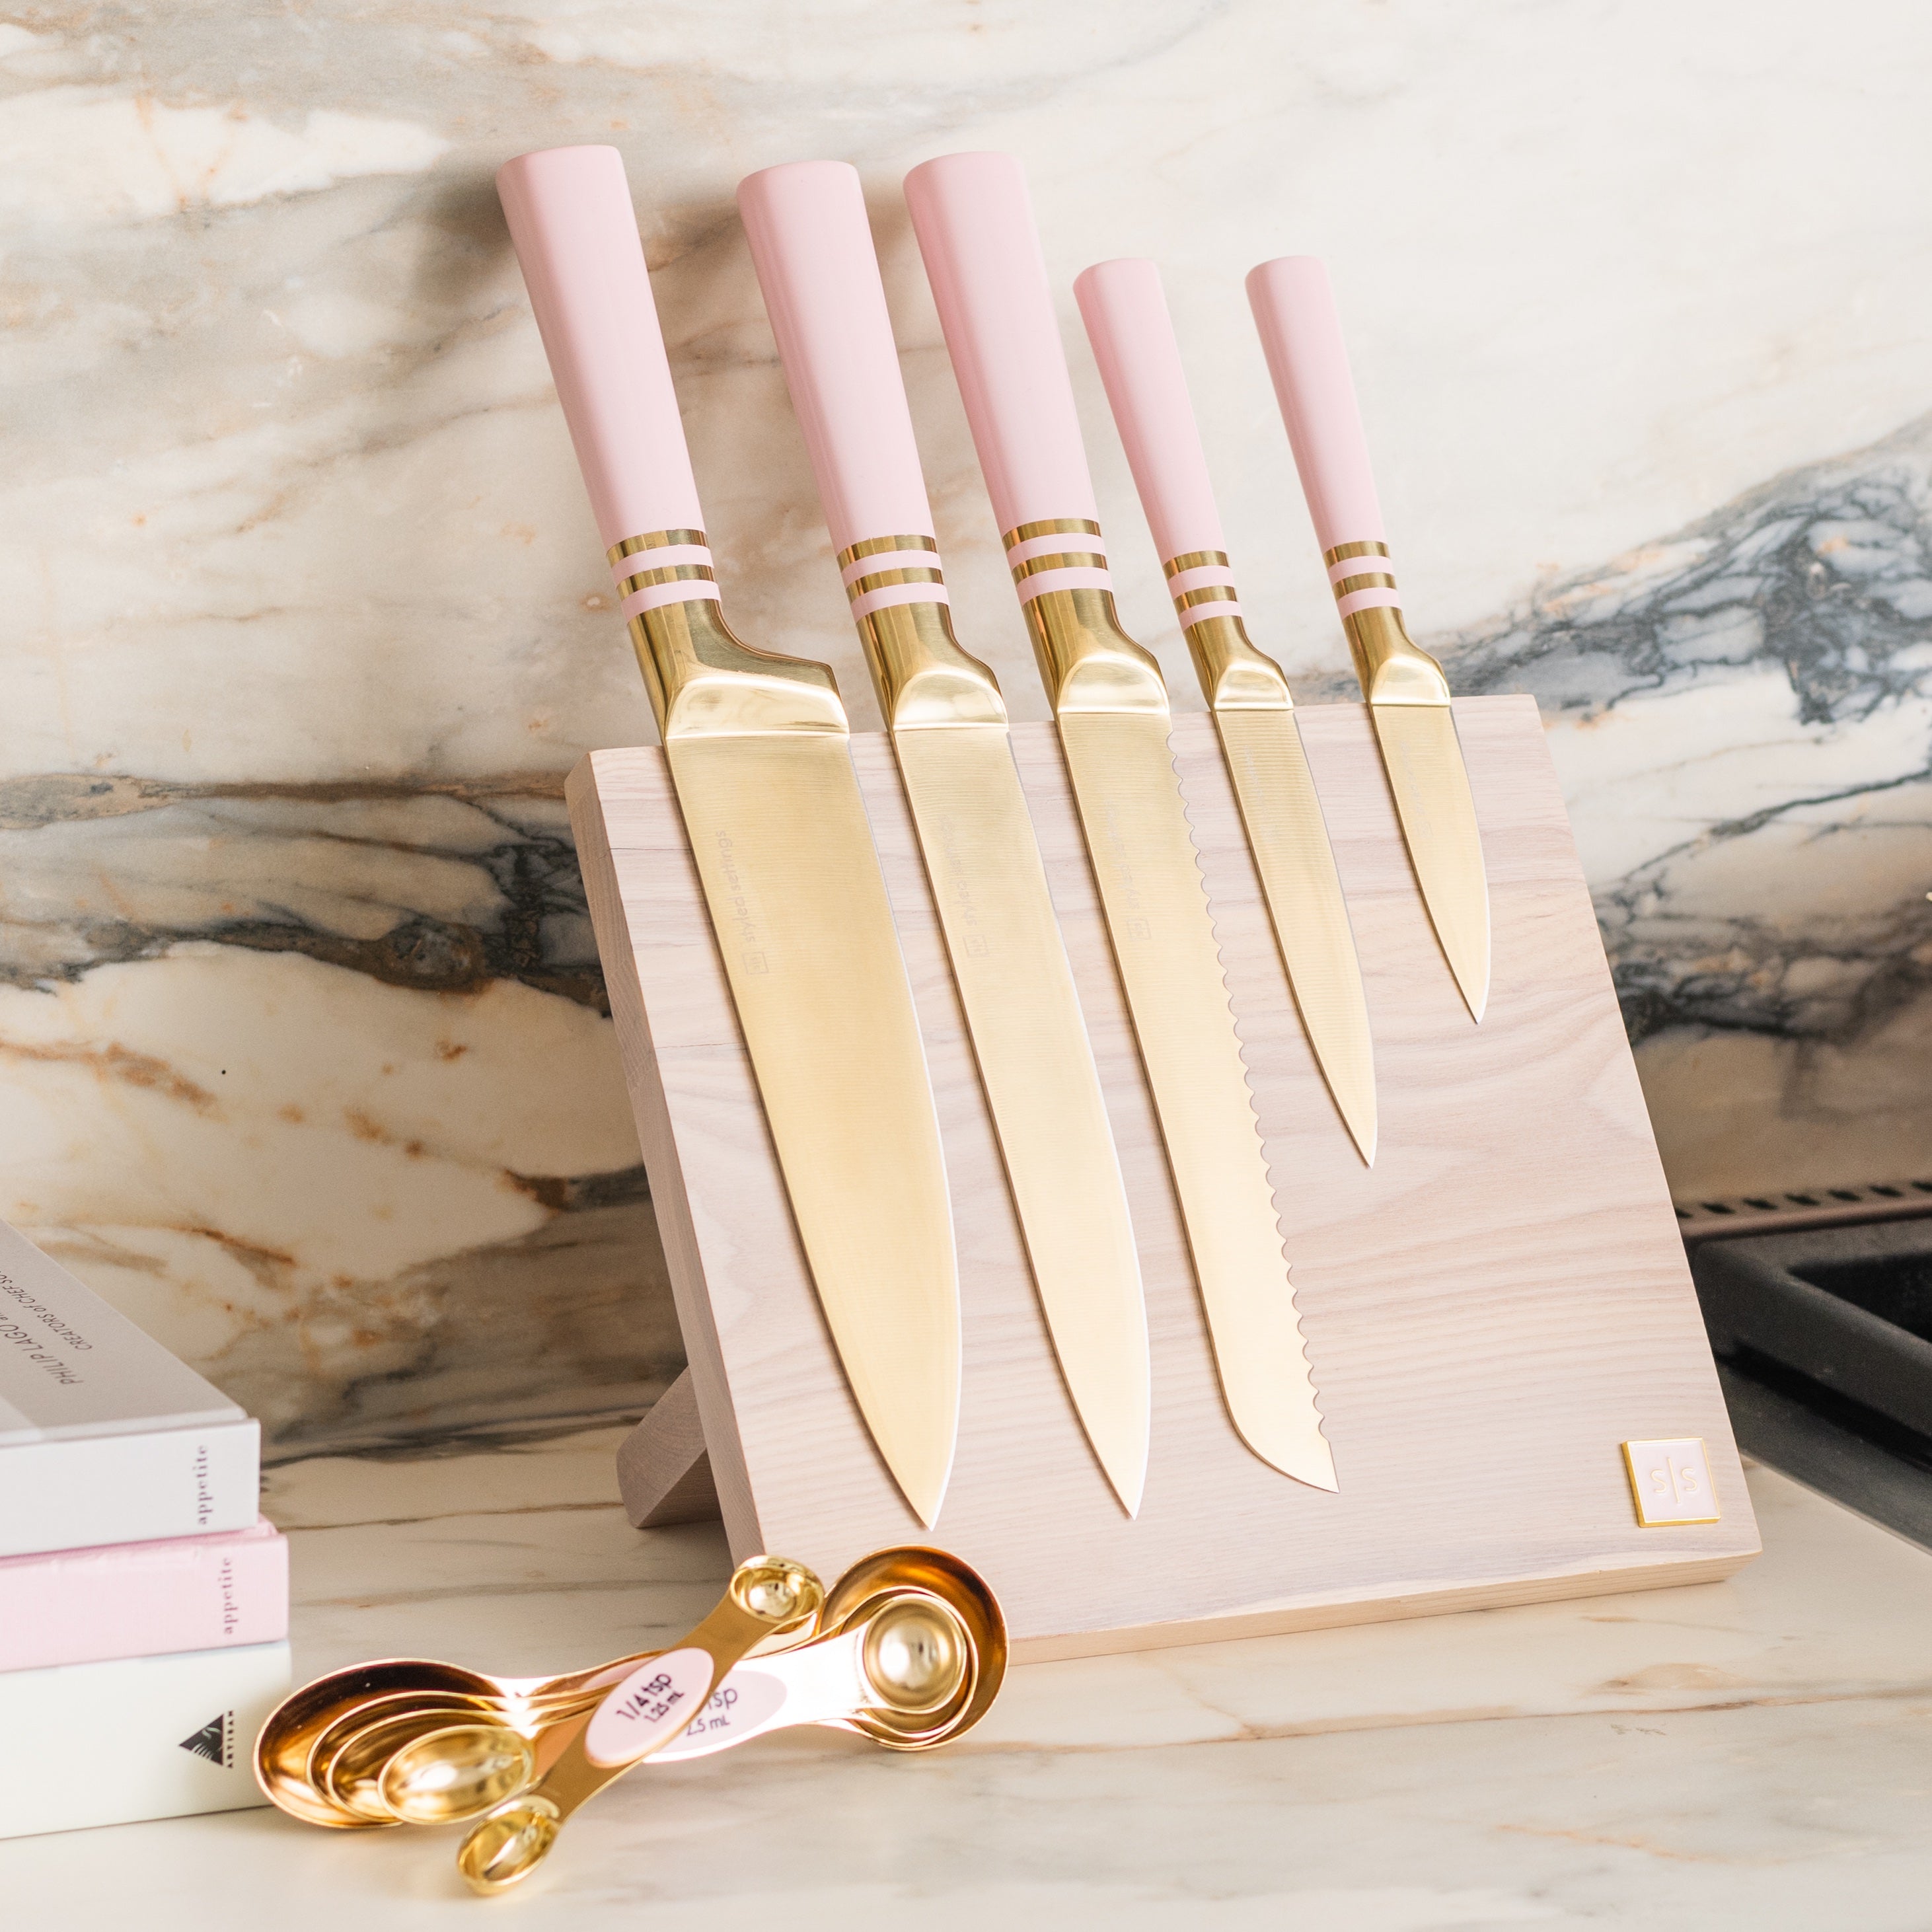  Pink Knife Set with Magnetic Knife Block - 6 PC Pink and Gold Knife  Set with Block Includes Pink Kitchen Knife Set & Ashwood Magnetic Knife  Holder - Pink Kitchen Accessories